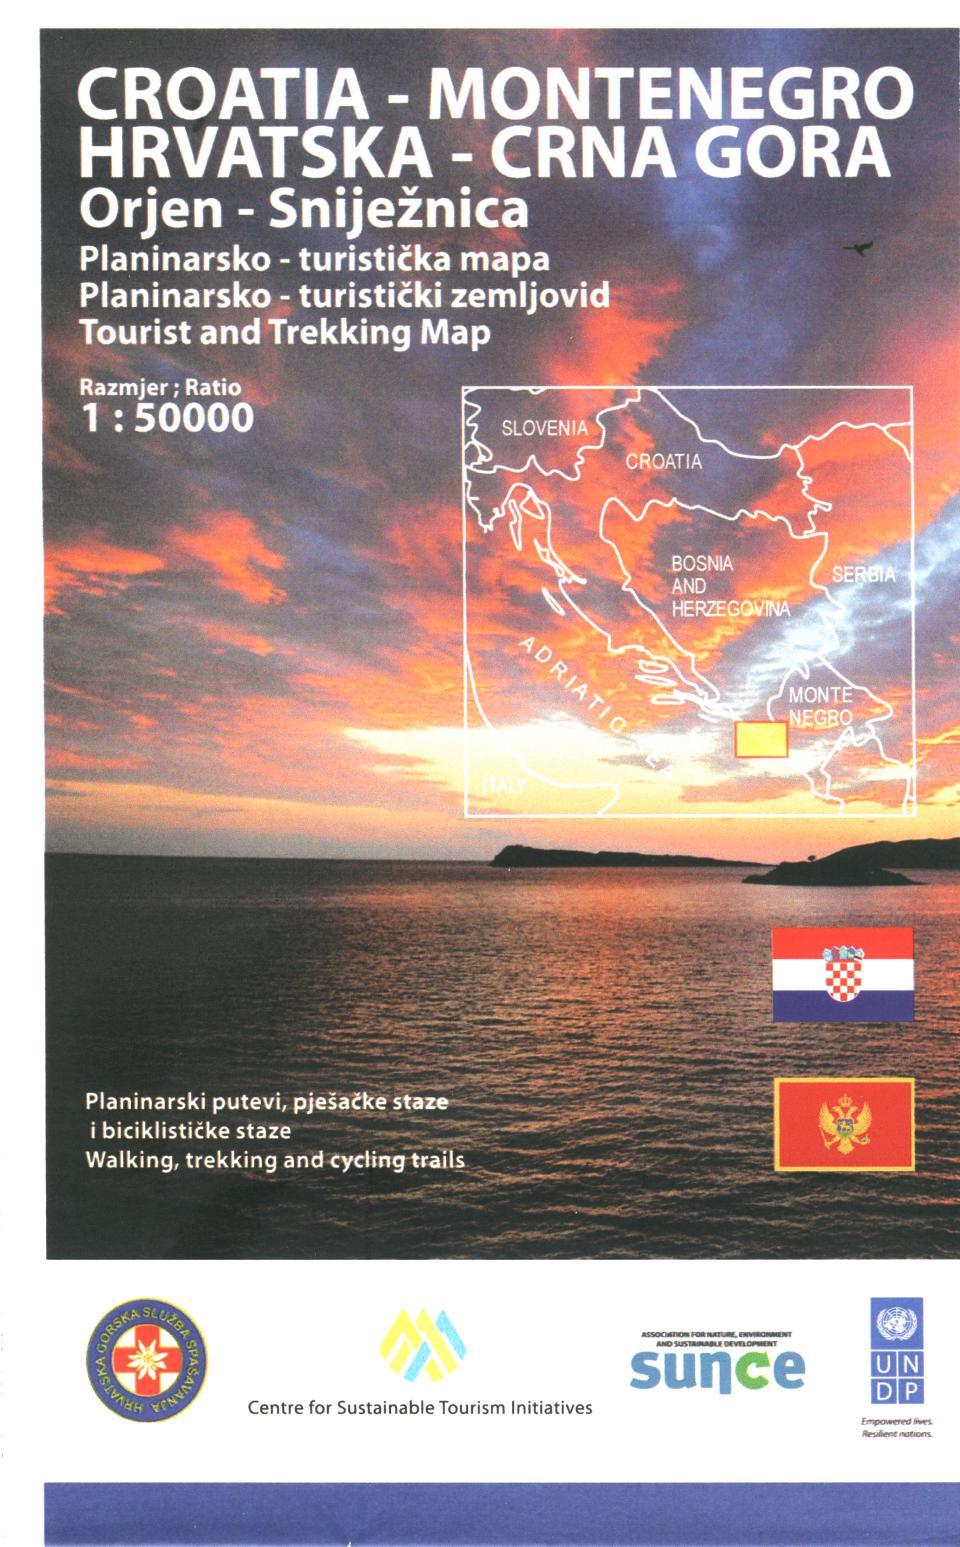 MAP AND ATLAS REVIEWS contains flags of the Republic of Croatia andmontenegroandlogosofpublishers and collaborators.